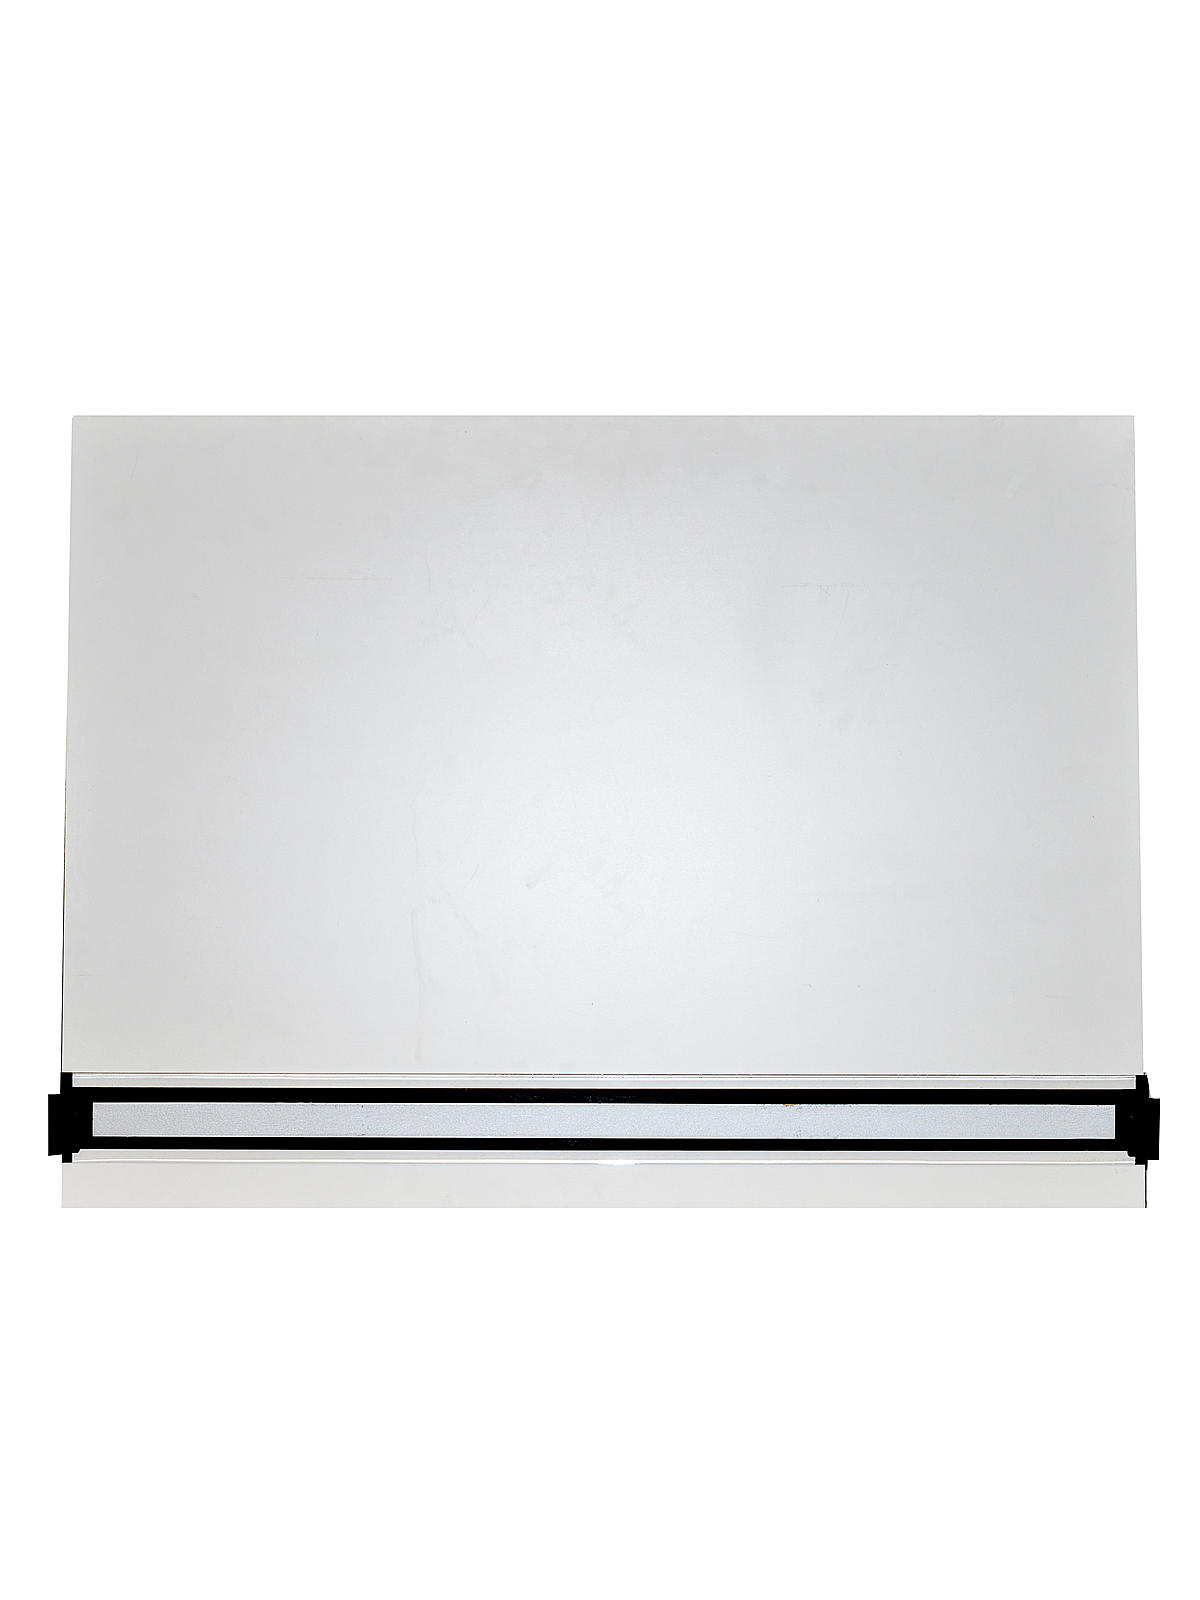 Drawing Board With Parallel Bar 23 In. X 31 In.